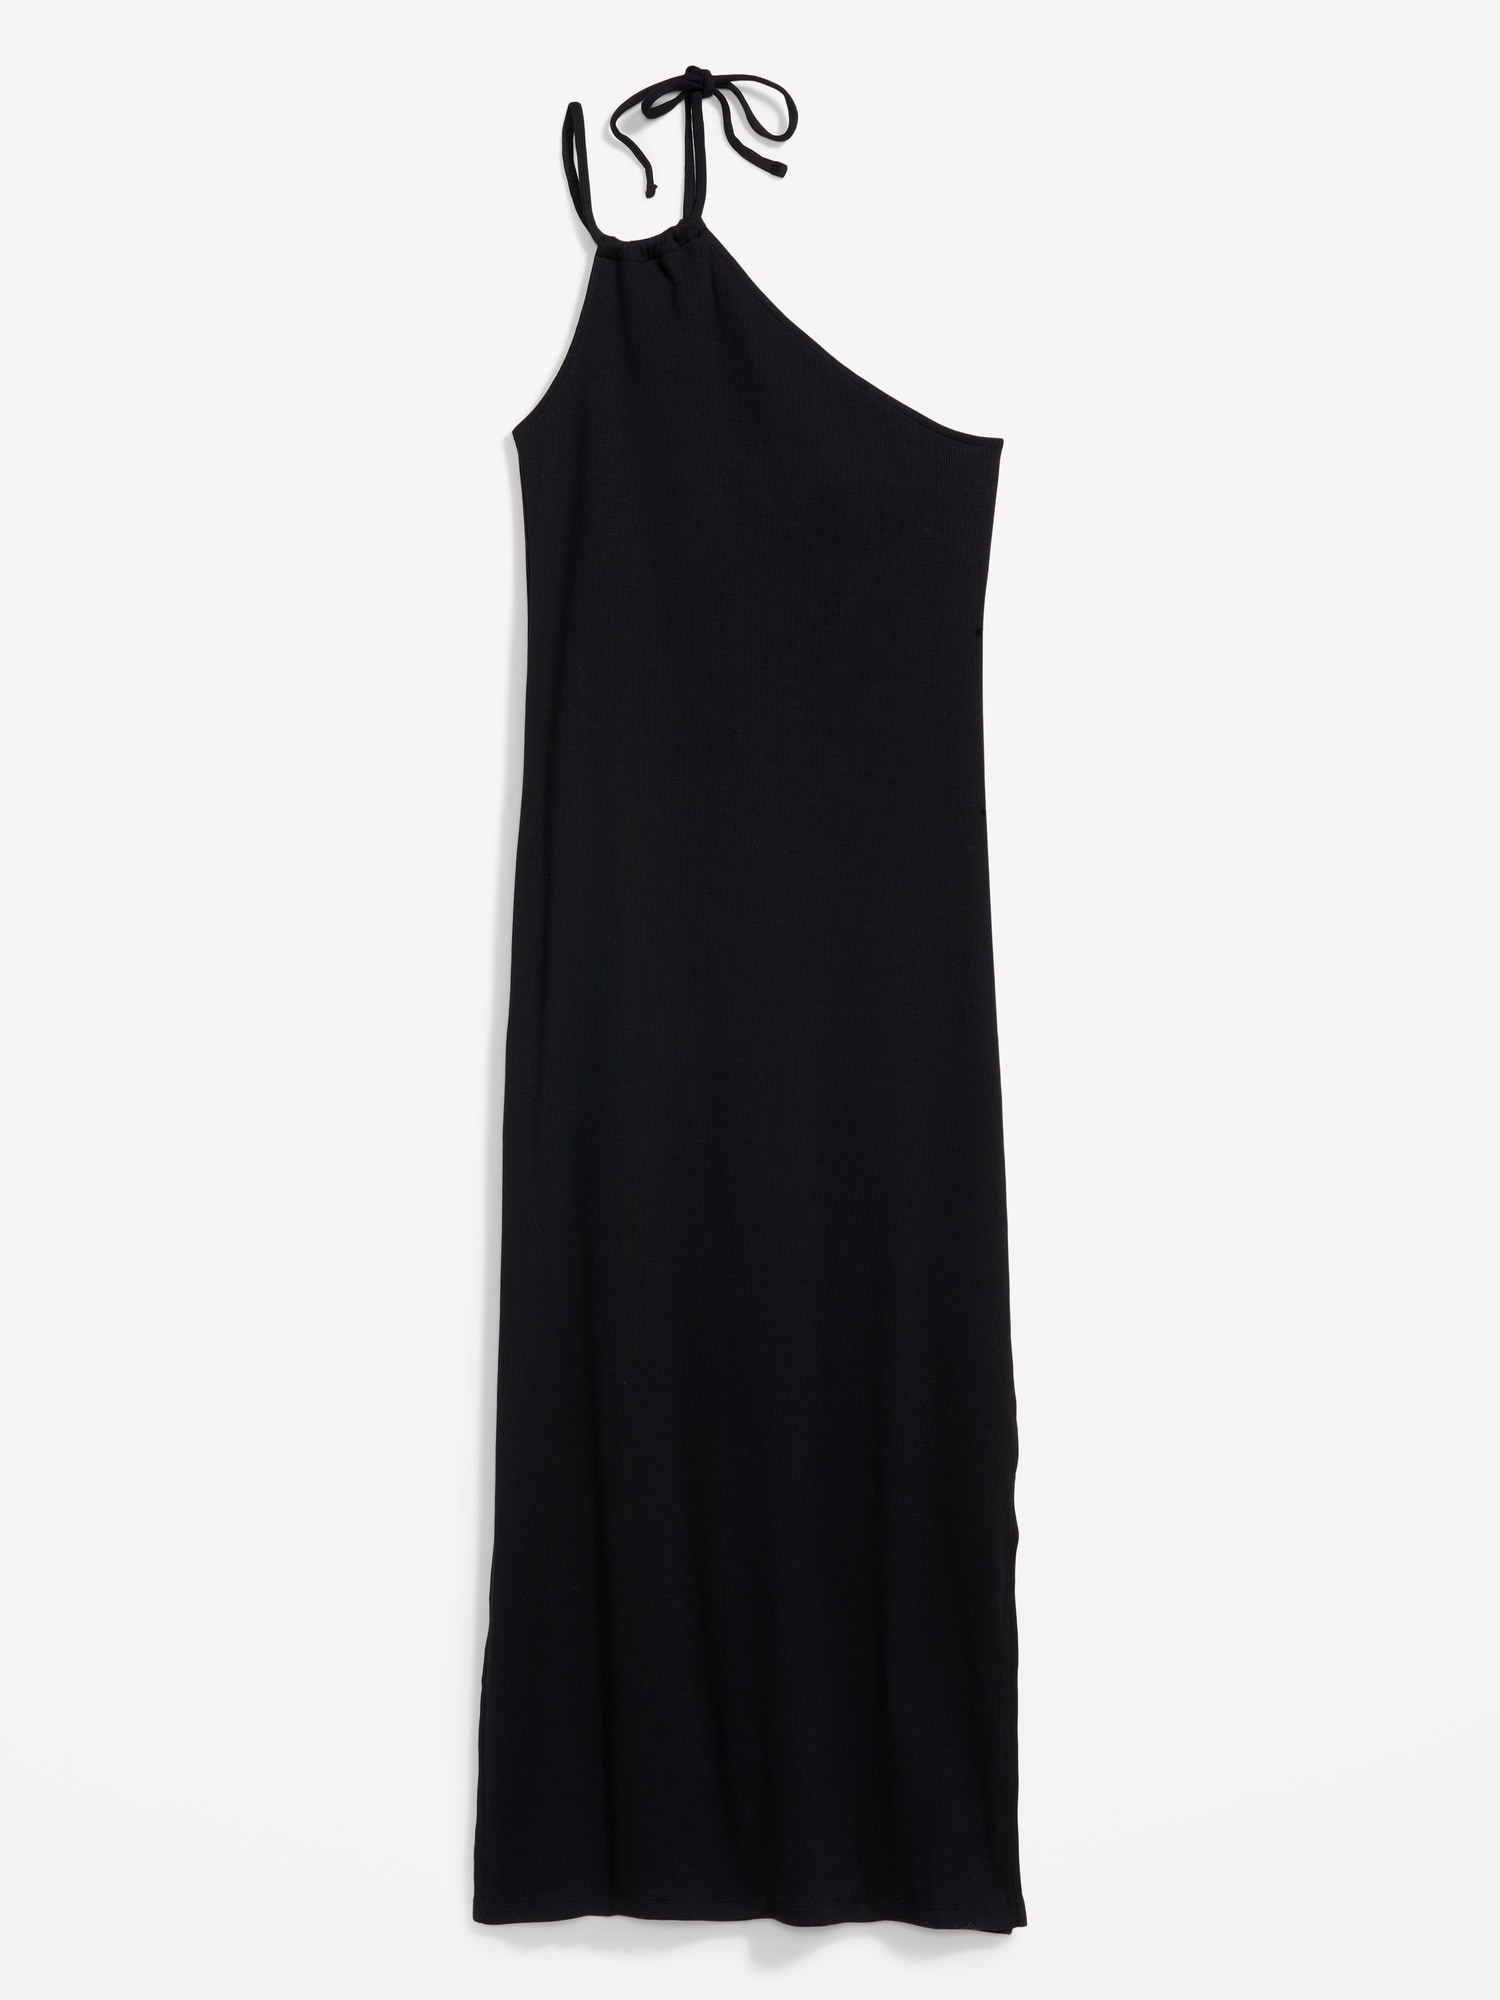 Fitted One-Shoulder Double-Strap Rib-Knit Midi Dress